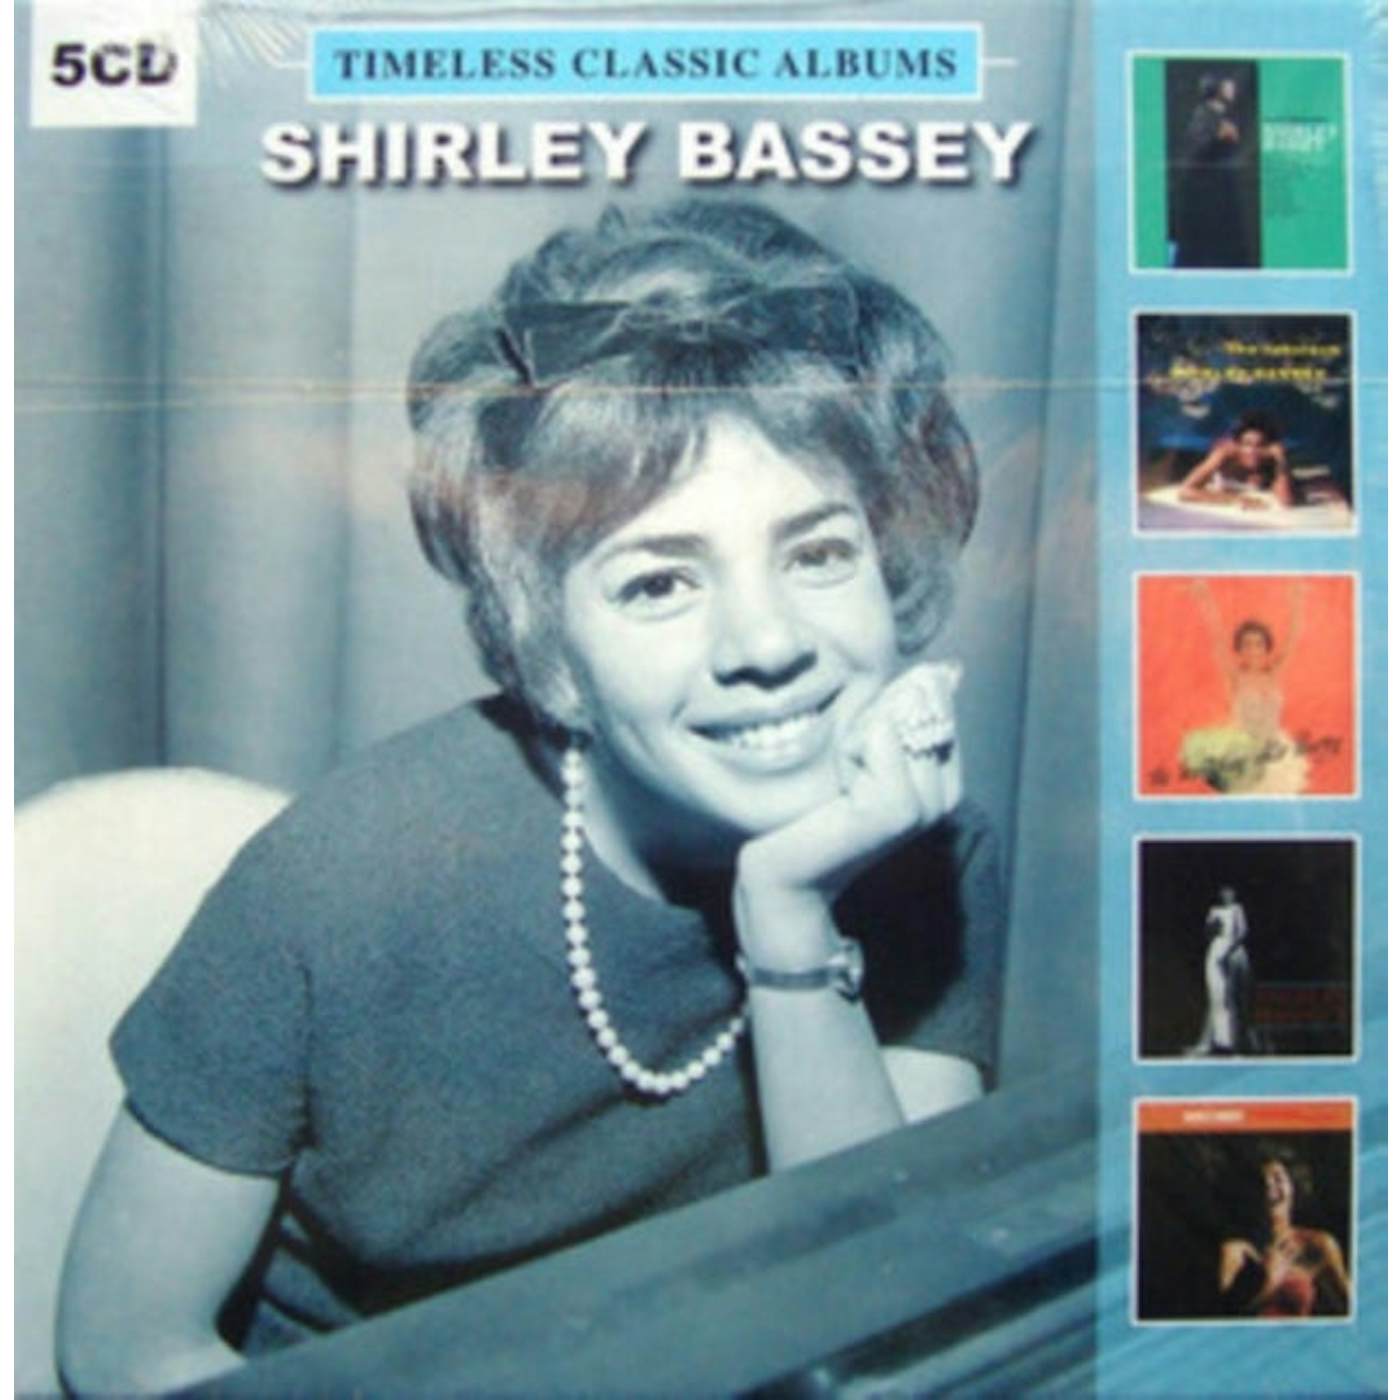 Shirley Bassey CD - Timeless Classic Albums